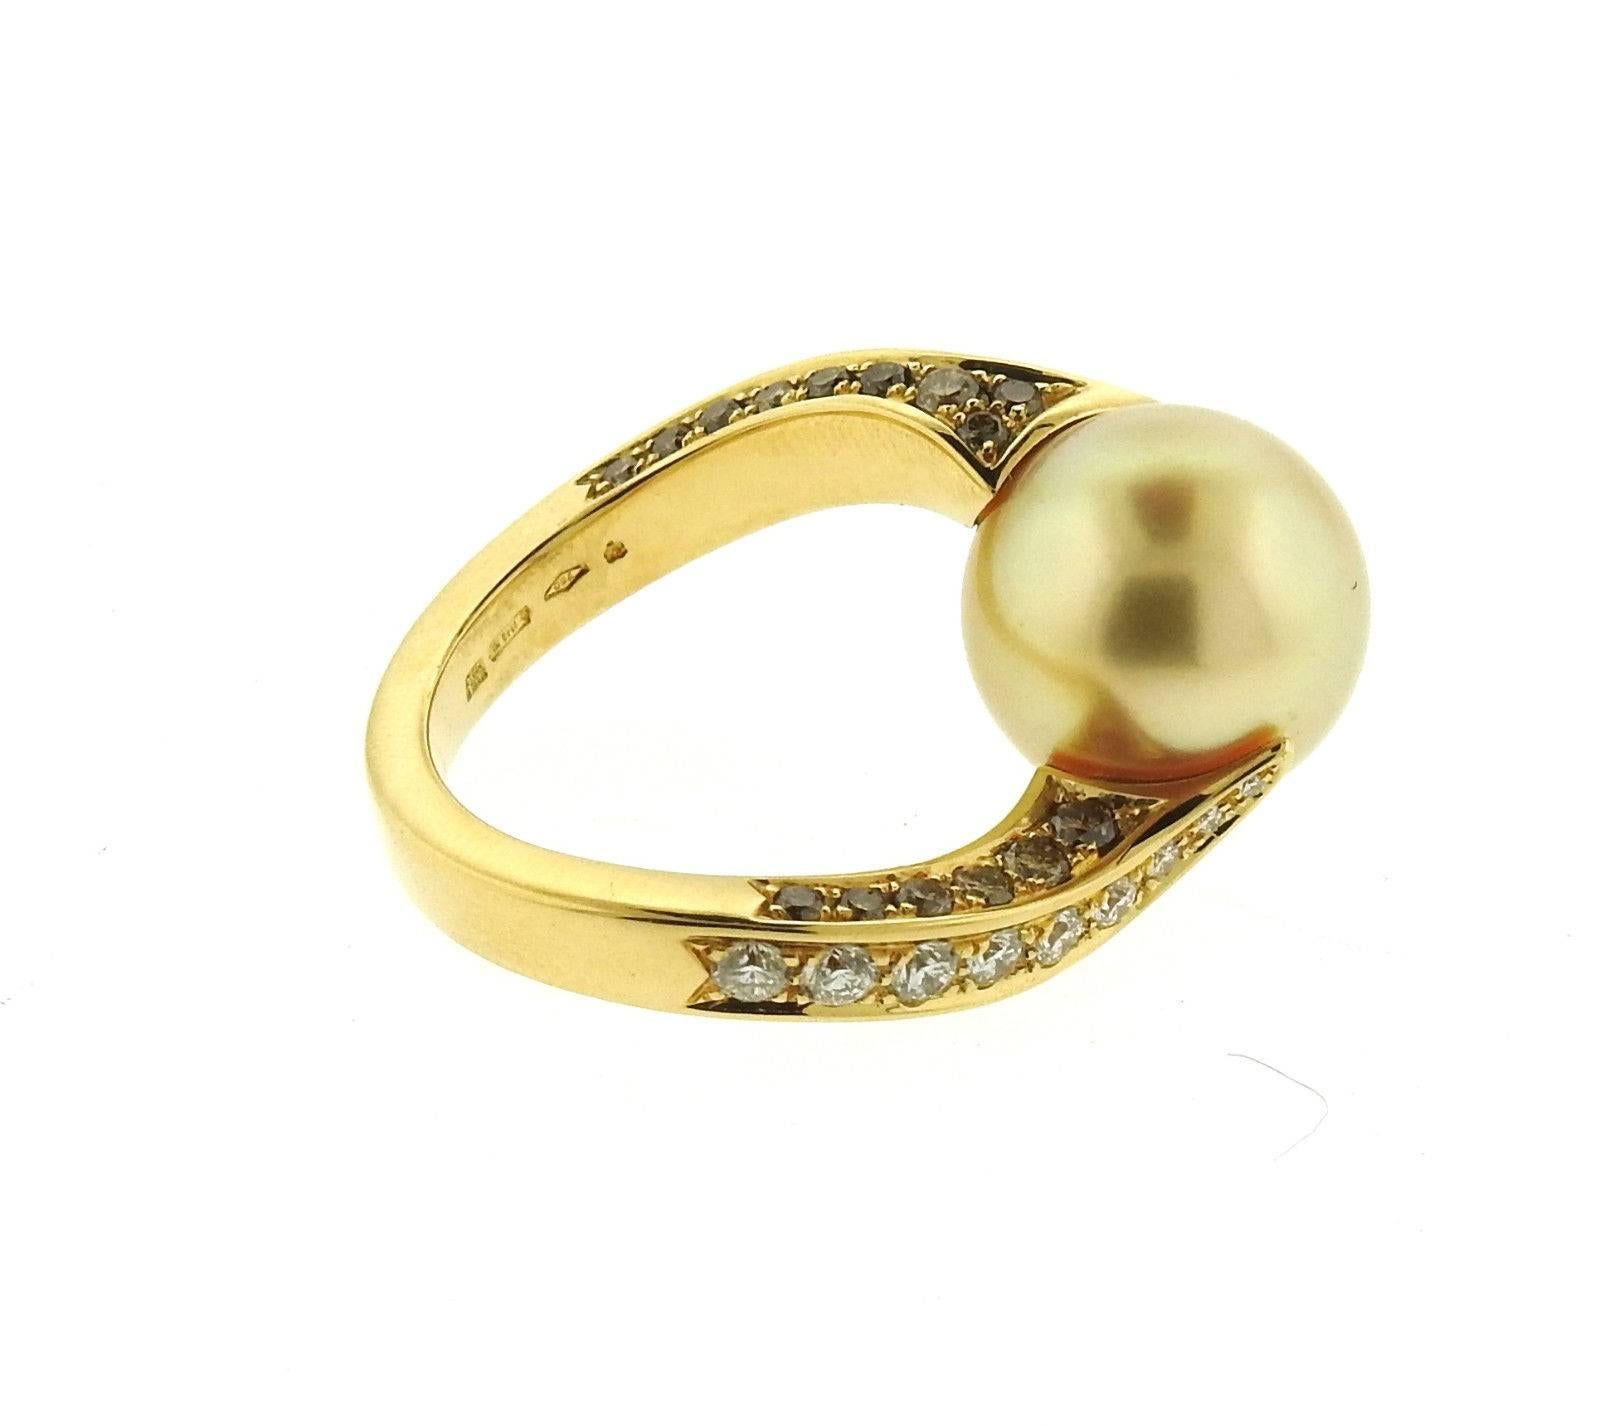 An 18k yellow gold ring set with a 12.5mm South Sea pearl and approximately 1.28ctw of G-Fancy/VS diamonds.  The ring is a size 6 1/4 and weighs 10.4 grams.  Marked: M hallmark, made in Italy, 750, 1840MI.   The retail of the ring is $12,650.